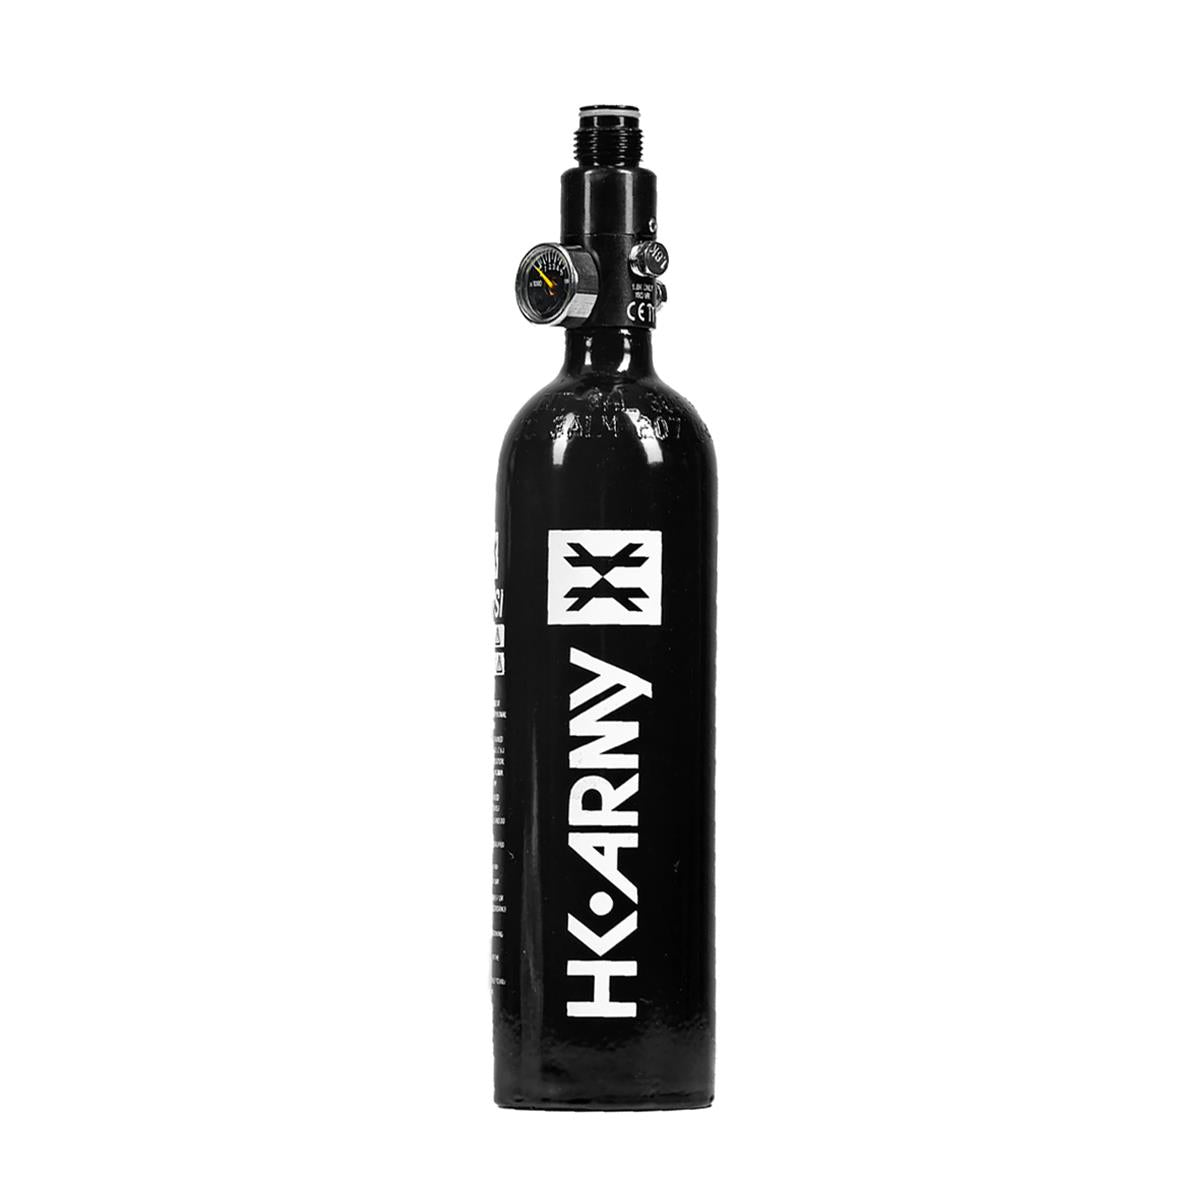 HK Army 26ci / 3000psi Aluminum Compressed Air HPA Paintball Tank - Black HK Army